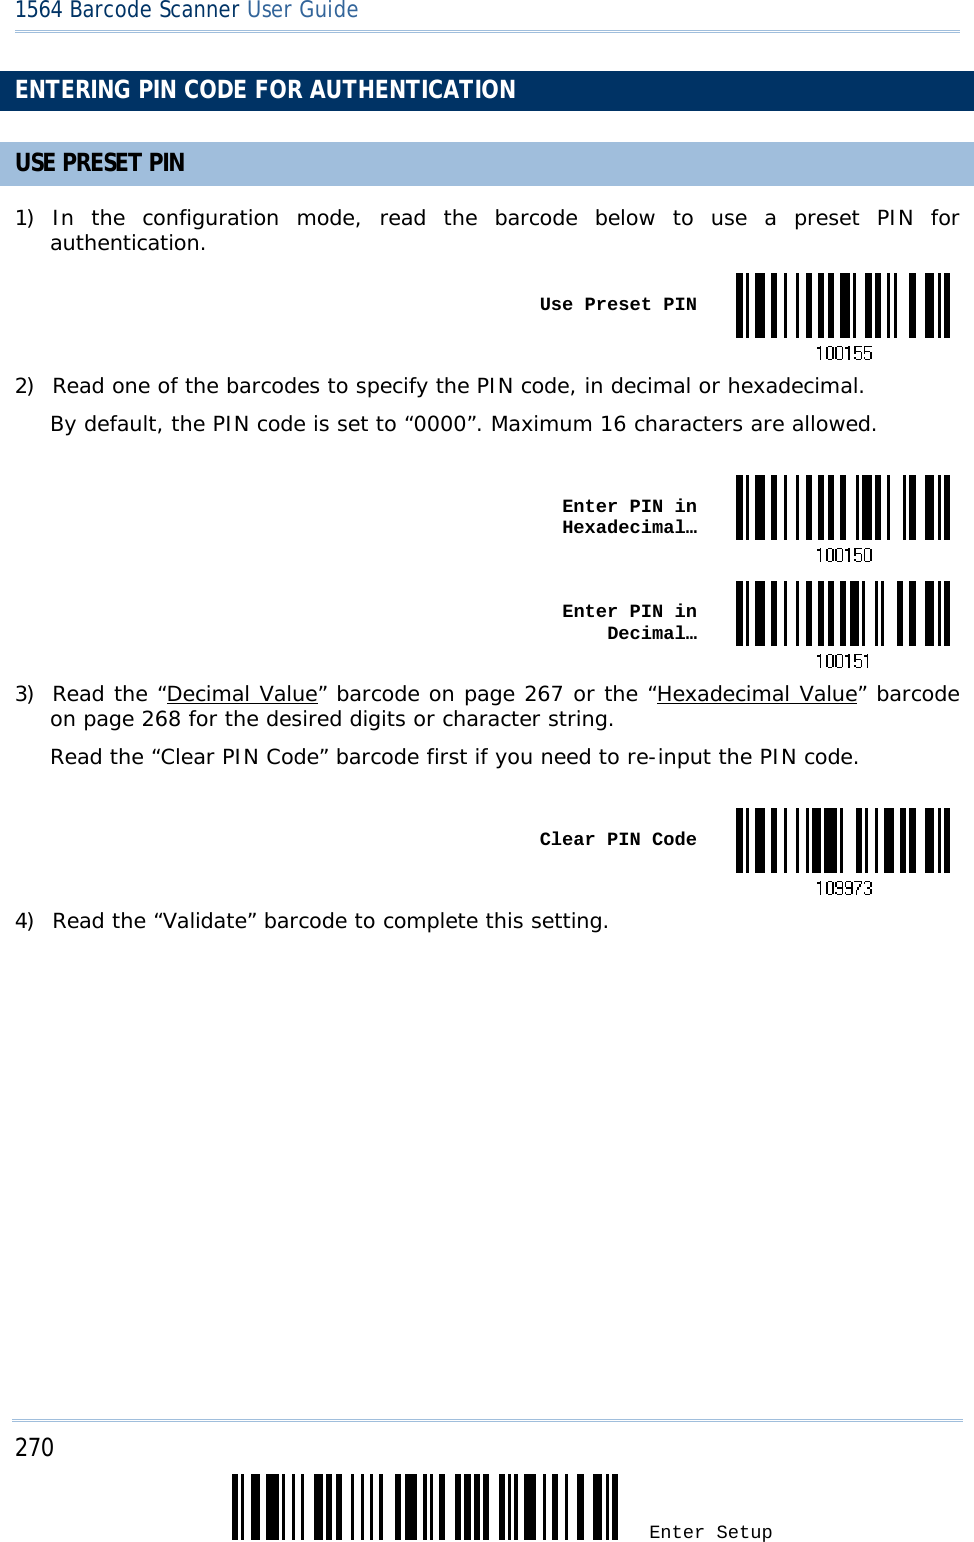 270 Enter Setup 1564 Barcode Scanner User Guide  ENTERING PIN CODE FOR AUTHENTICATION USE PRESET PIN 1) In the configuration mode, read the barcode below to use a preset PIN for authentication.  Use Preset PIN2) Read one of the barcodes to specify the PIN code, in decimal or hexadecimal.  By default, the PIN code is set to “0000”. Maximum 16 characters are allowed.   Enter PIN in Hexadecimal… Enter PIN in  Decimal…3) Read the “Decimal Value” barcode on page 267 or the “Hexadecimal Value” barcode on page 268 for the desired digits or character string.  Read the “Clear PIN Code” barcode first if you need to re-input the PIN code.   Clear PIN Code4) Read the “Validate” barcode to complete this setting.     